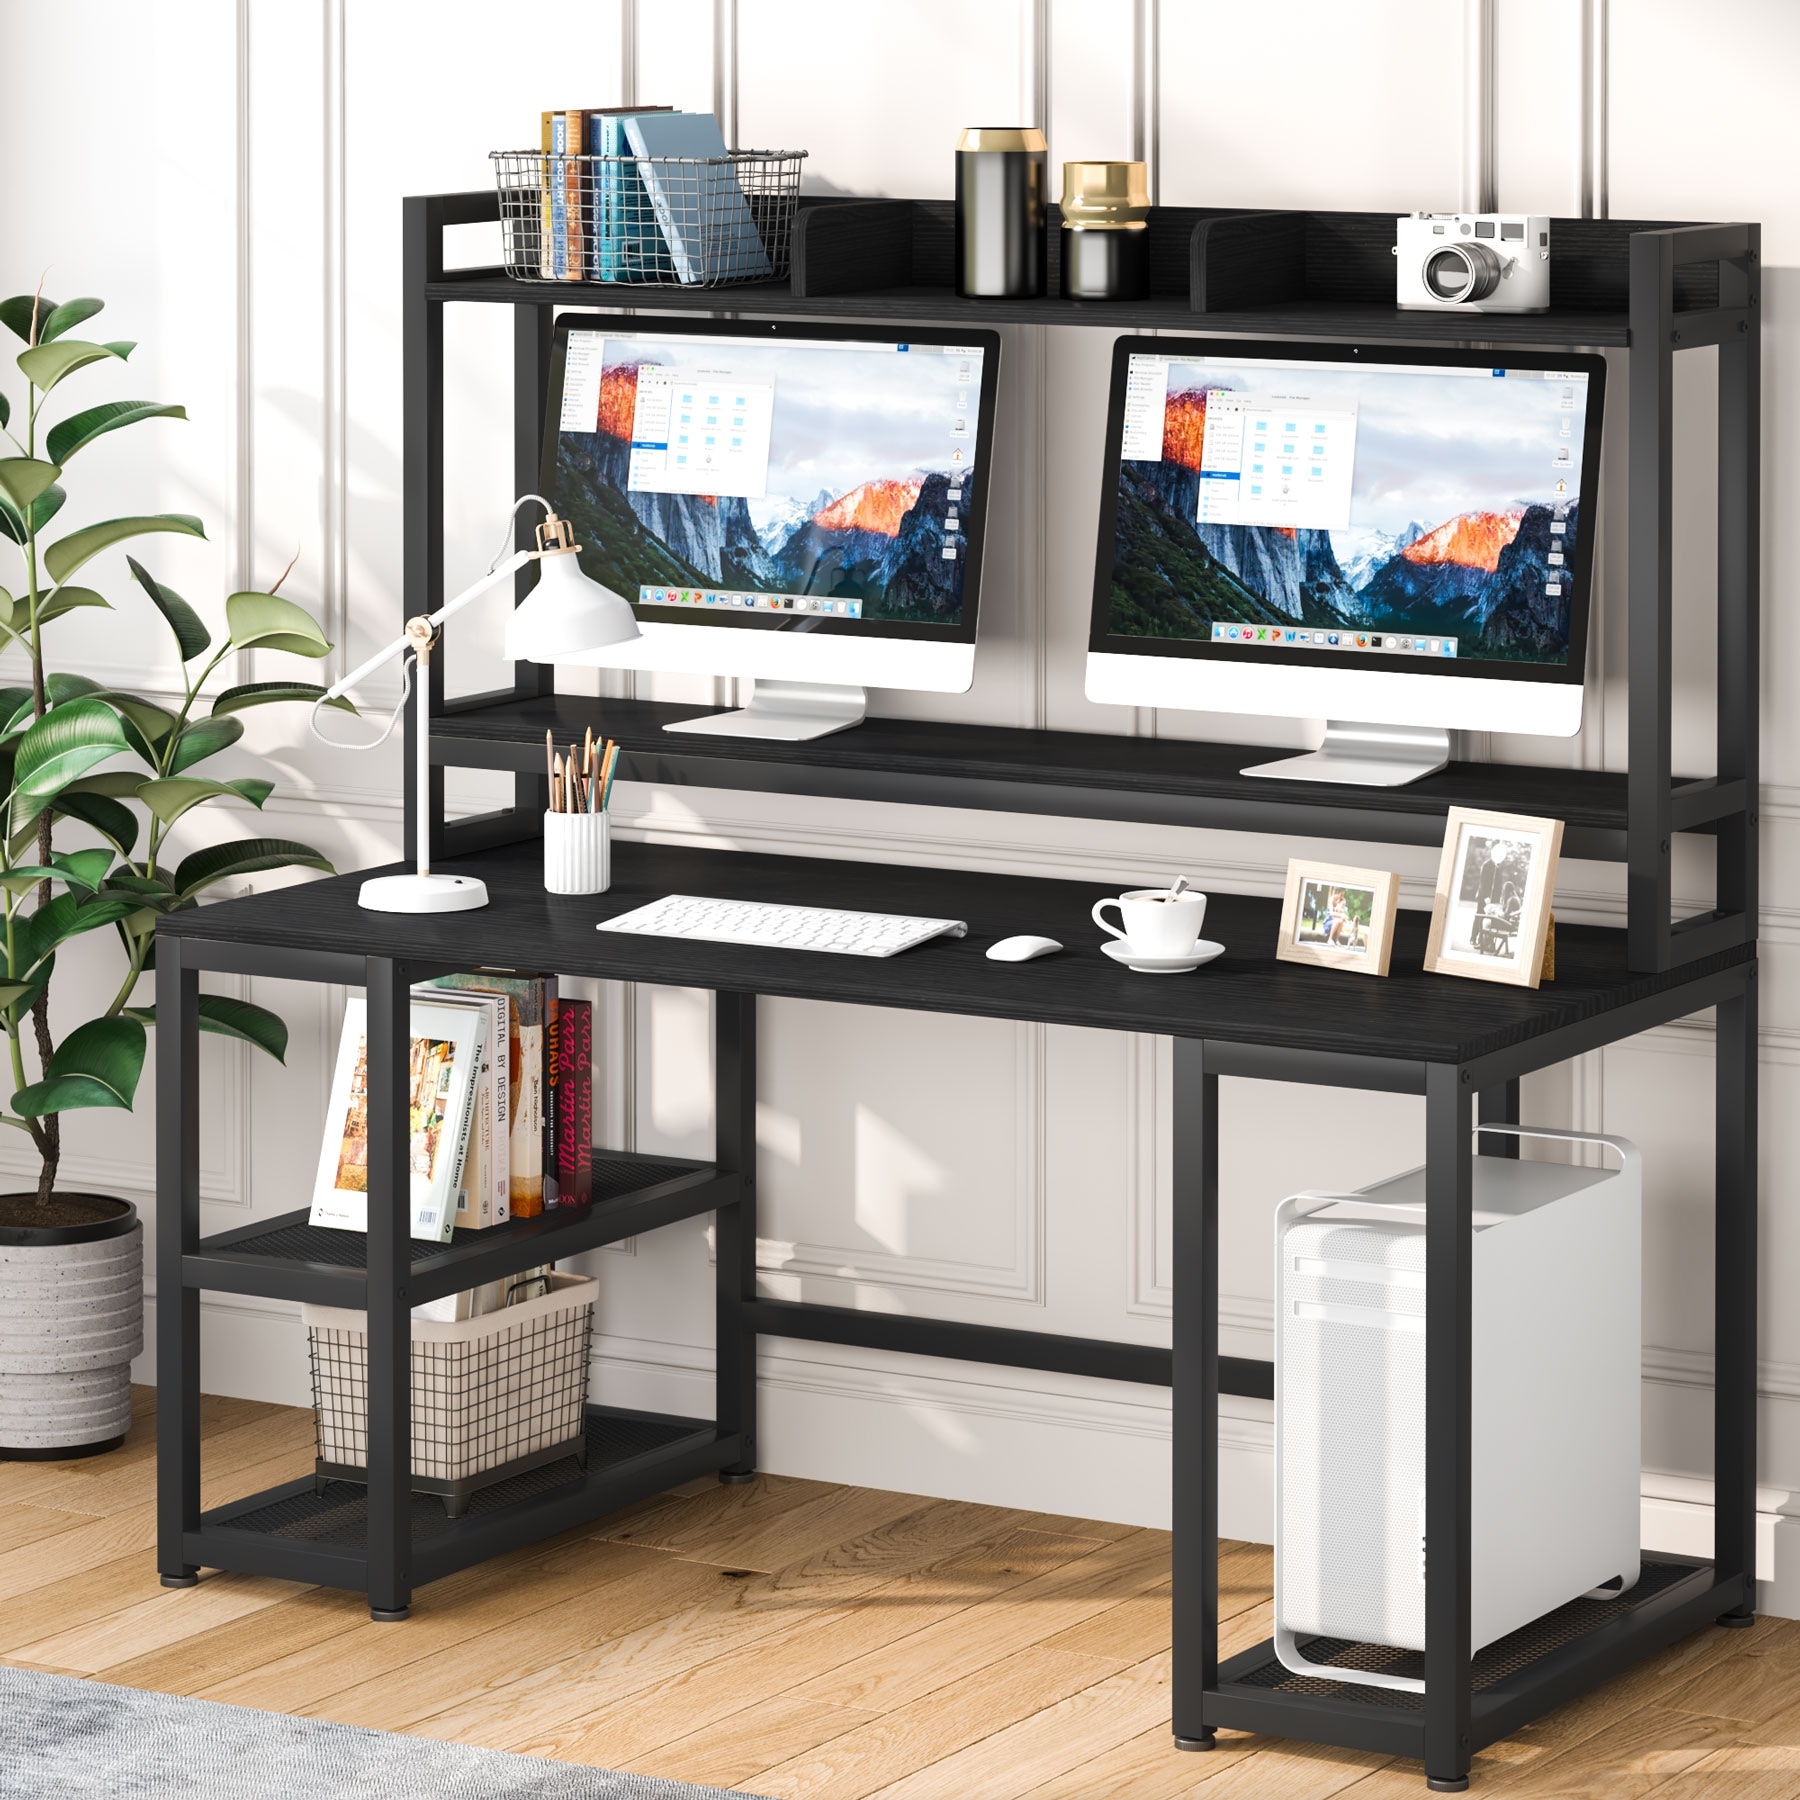 https://ak1.ostkcdn.com/images/products/is/images/direct/0a5702858fd8144e3ccd9025cf8ea97e8b0d1f29/Tribesigns-Computer-Desk-with-Hutch-and-Monitor-Stand%2C-55%22-Industrial-Home-Office-Desk-with-Open-Storage-Shelves-for-Home-Office.jpg